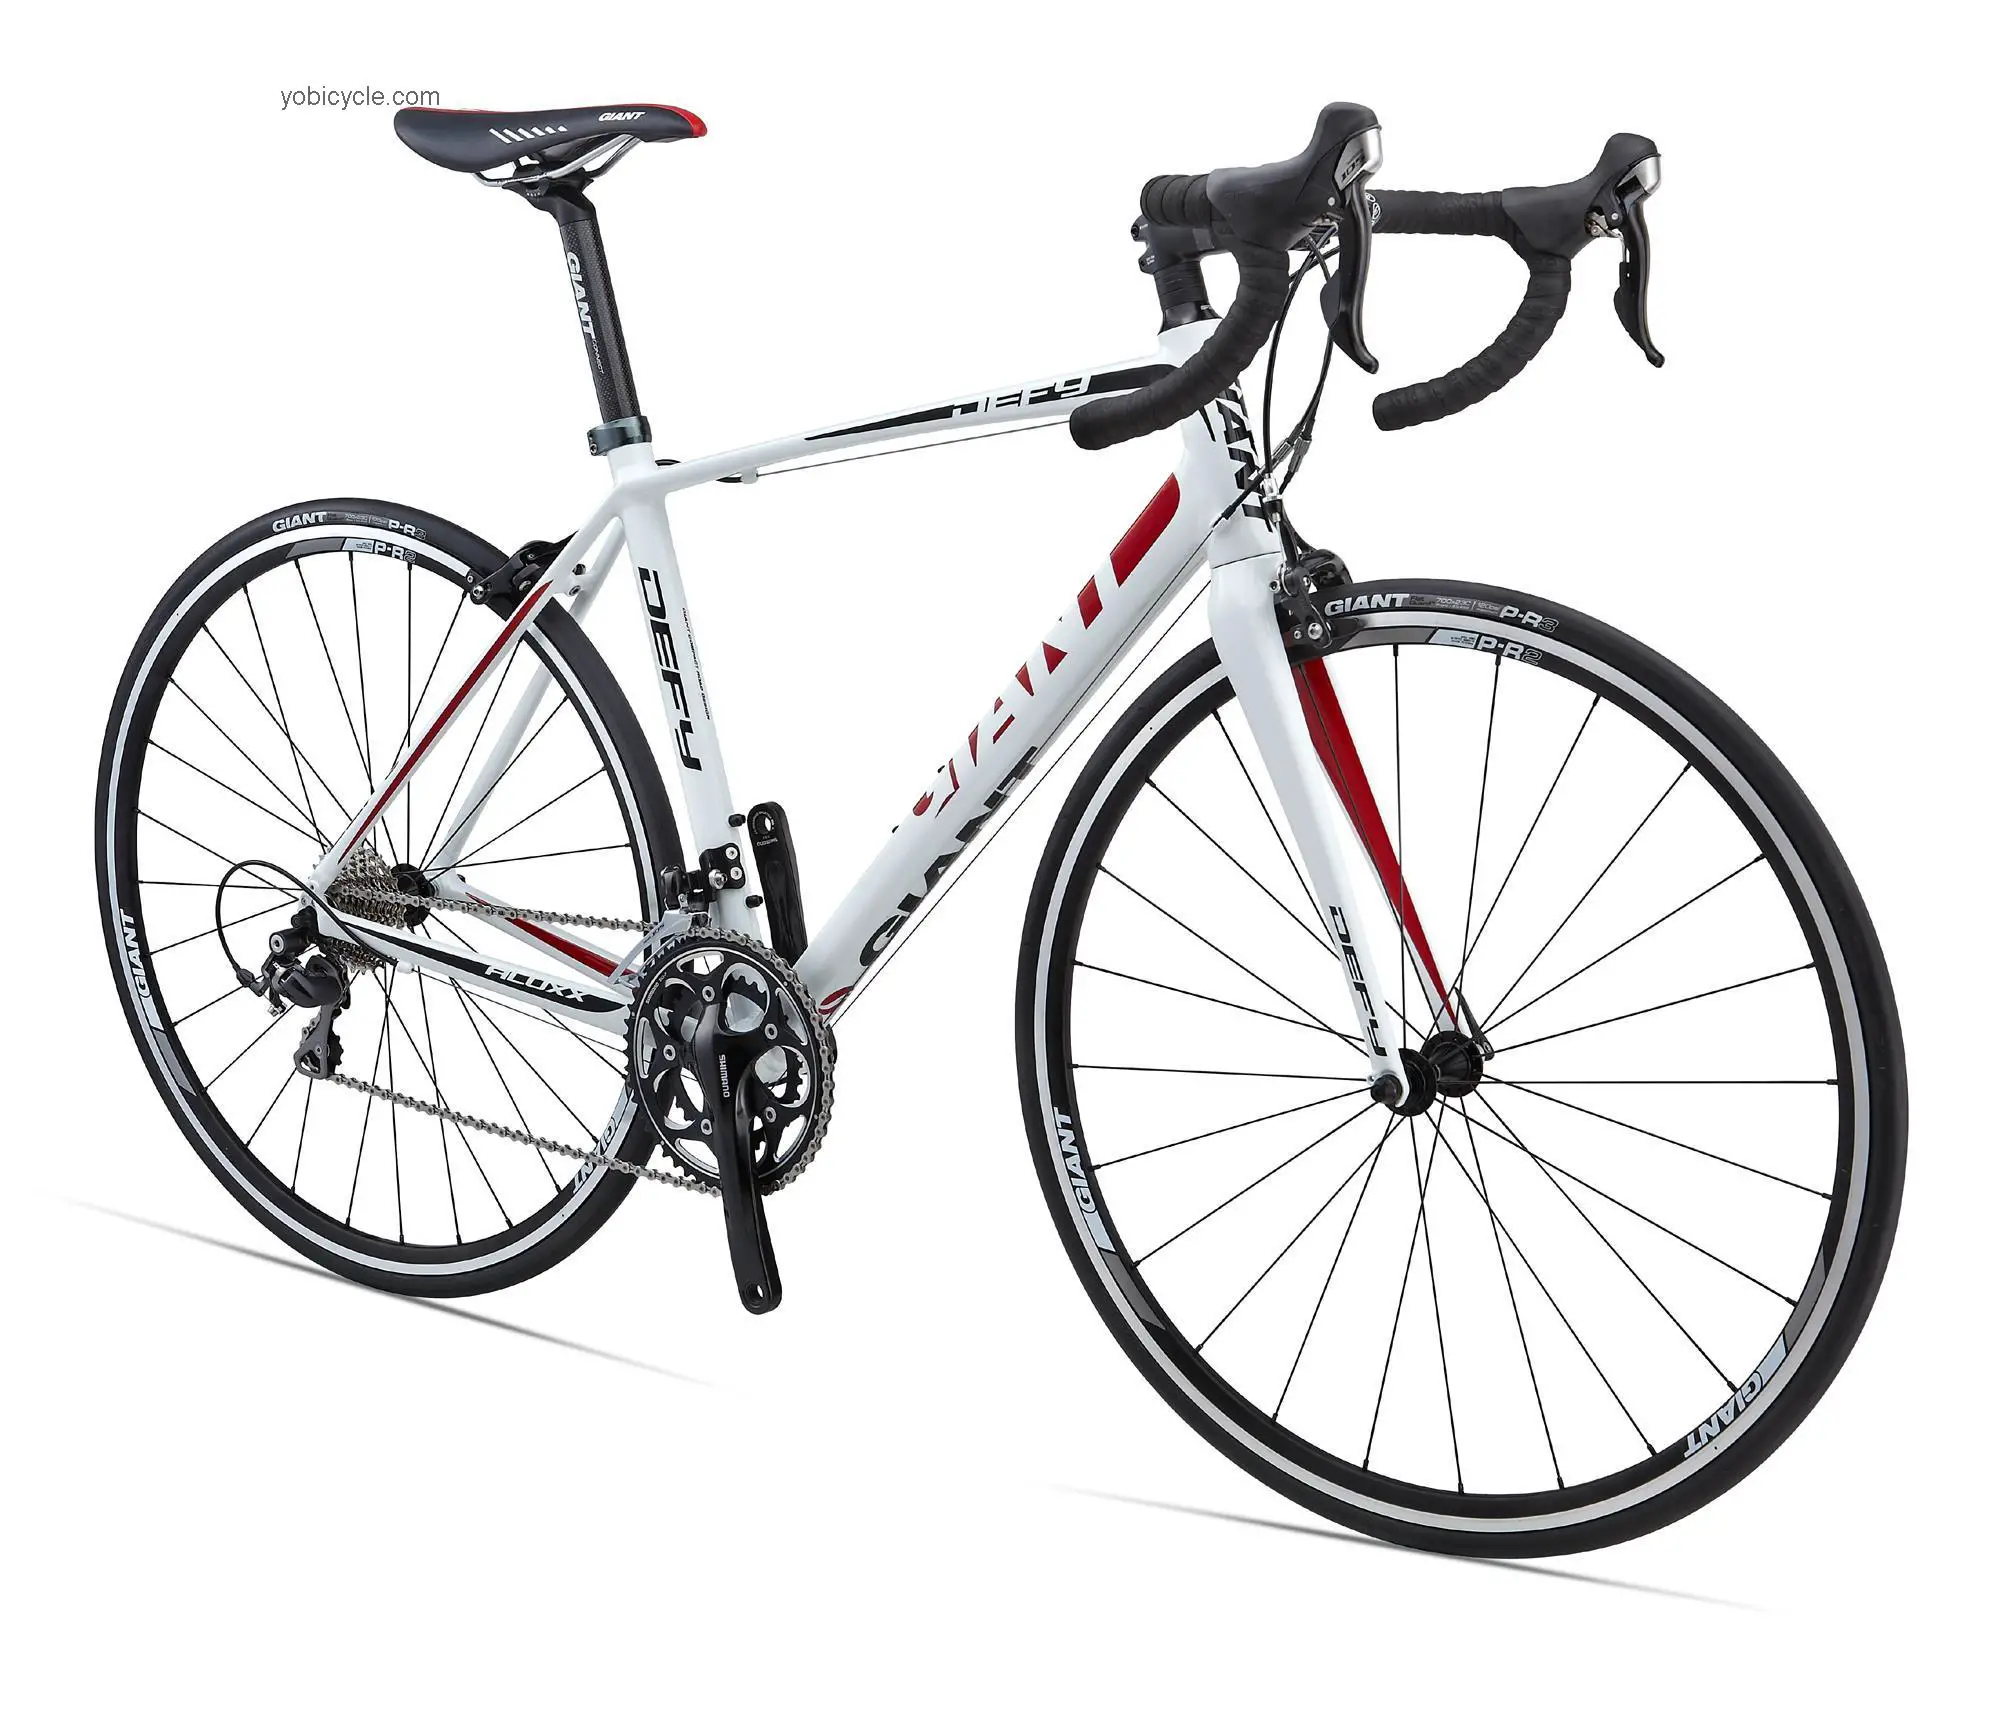 Giant Defy 1 2013 comparison online with competitors